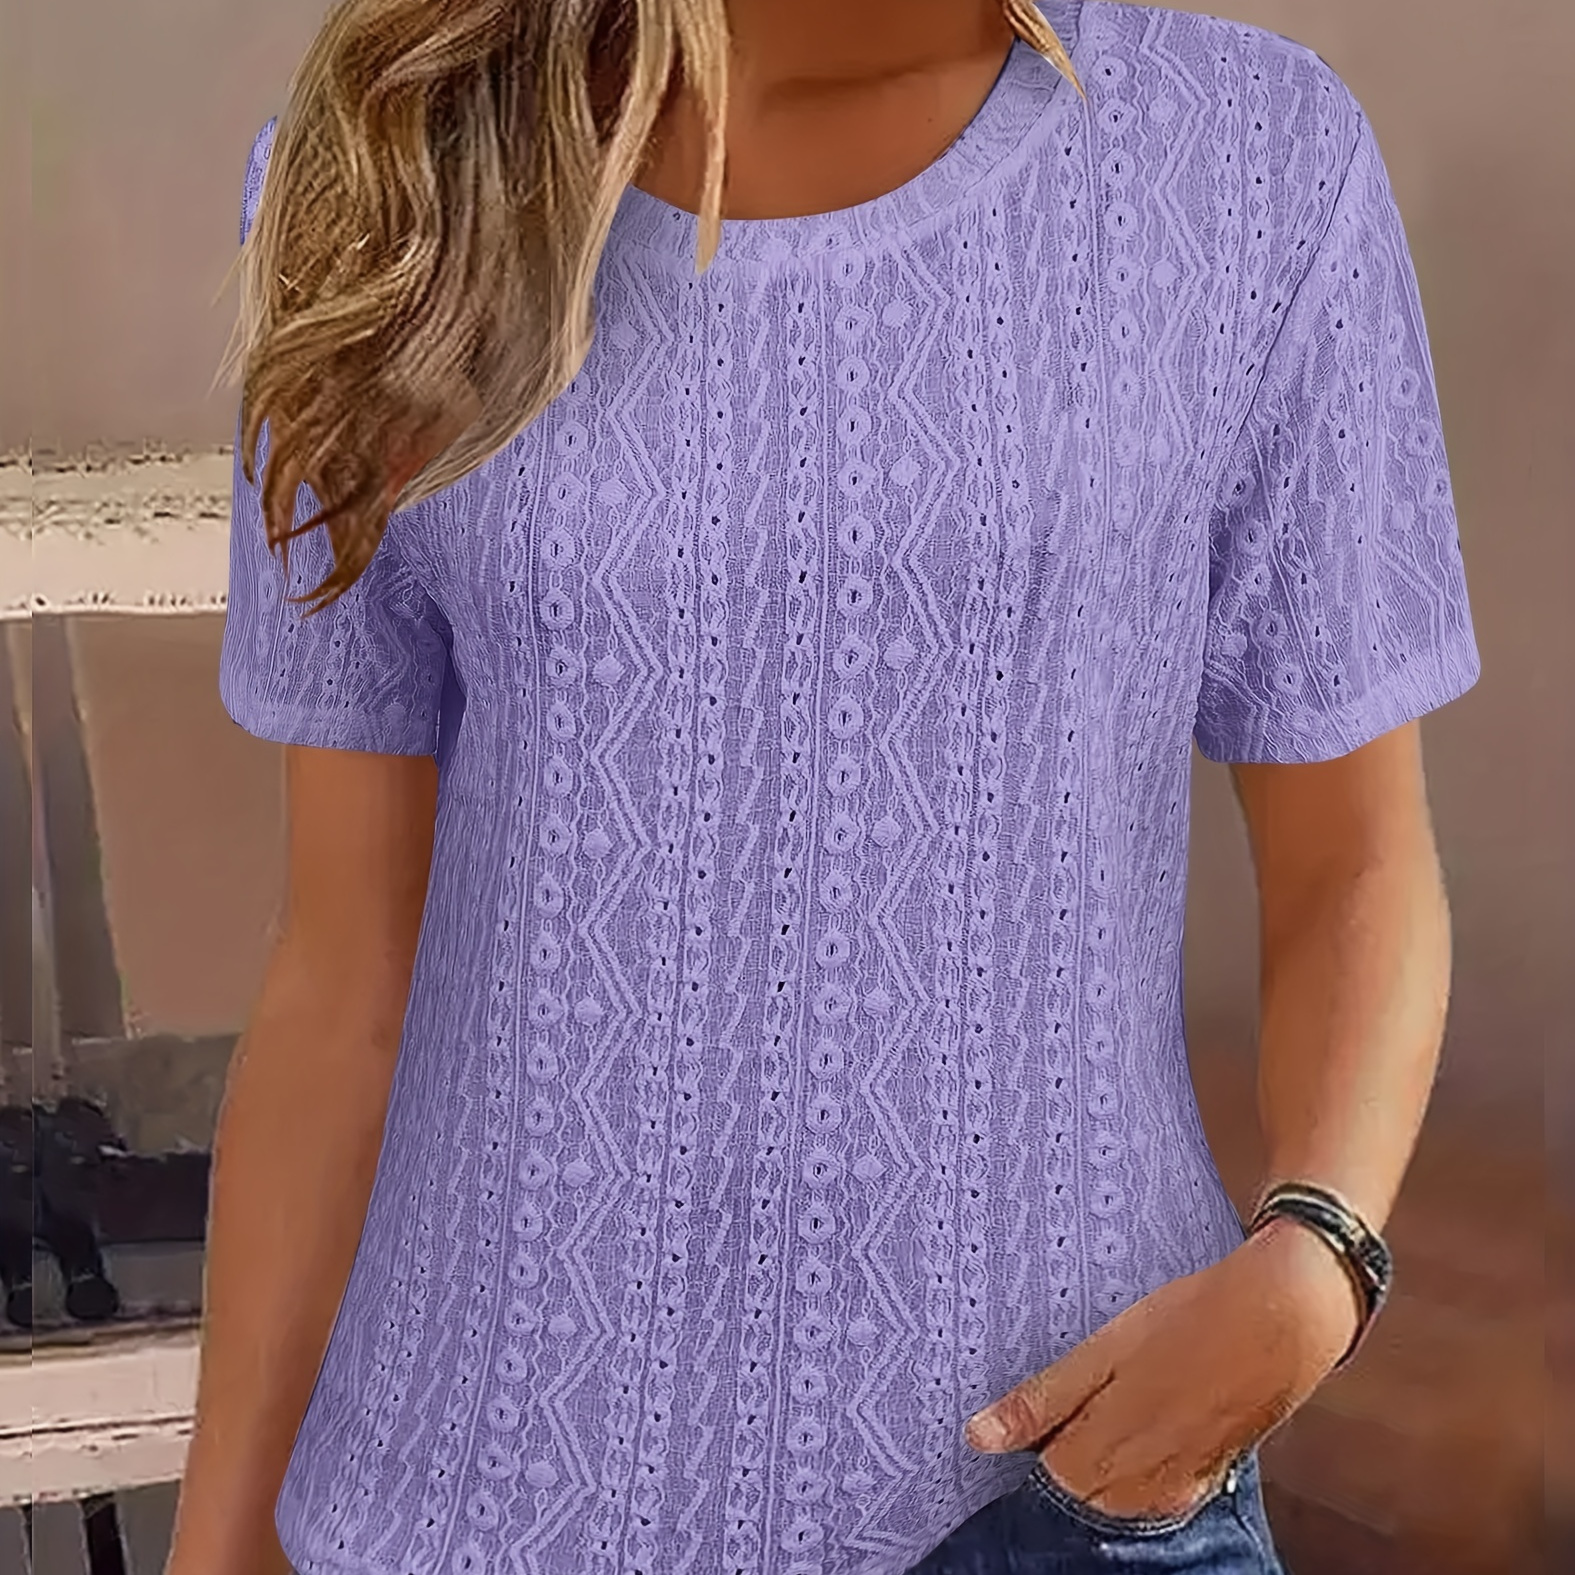 

Eyelet Crew Neck Fashion T-shirt, Casual Short Sleeve Top For Spring & Summer, Women's Clothing